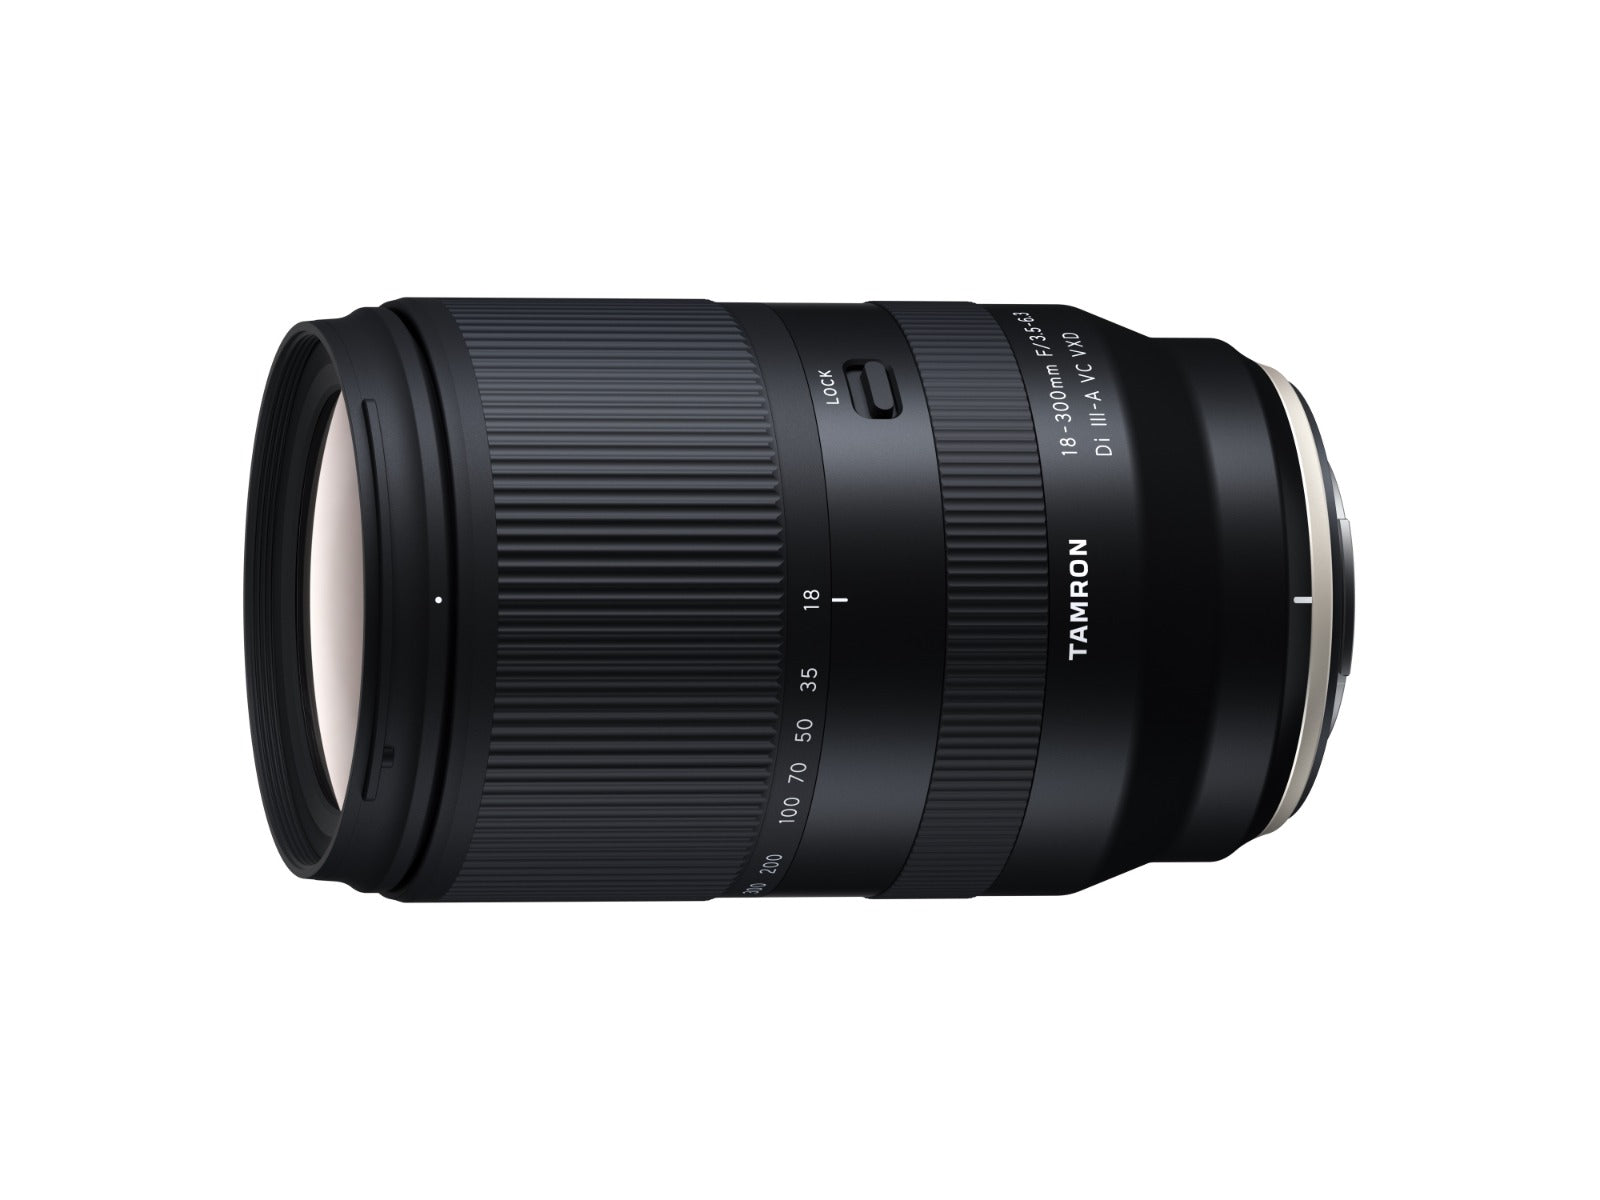 Product Image of Tamron 18-300mm F3.5-6.3 Di III-A VC VXD Lens for FujiFilm X